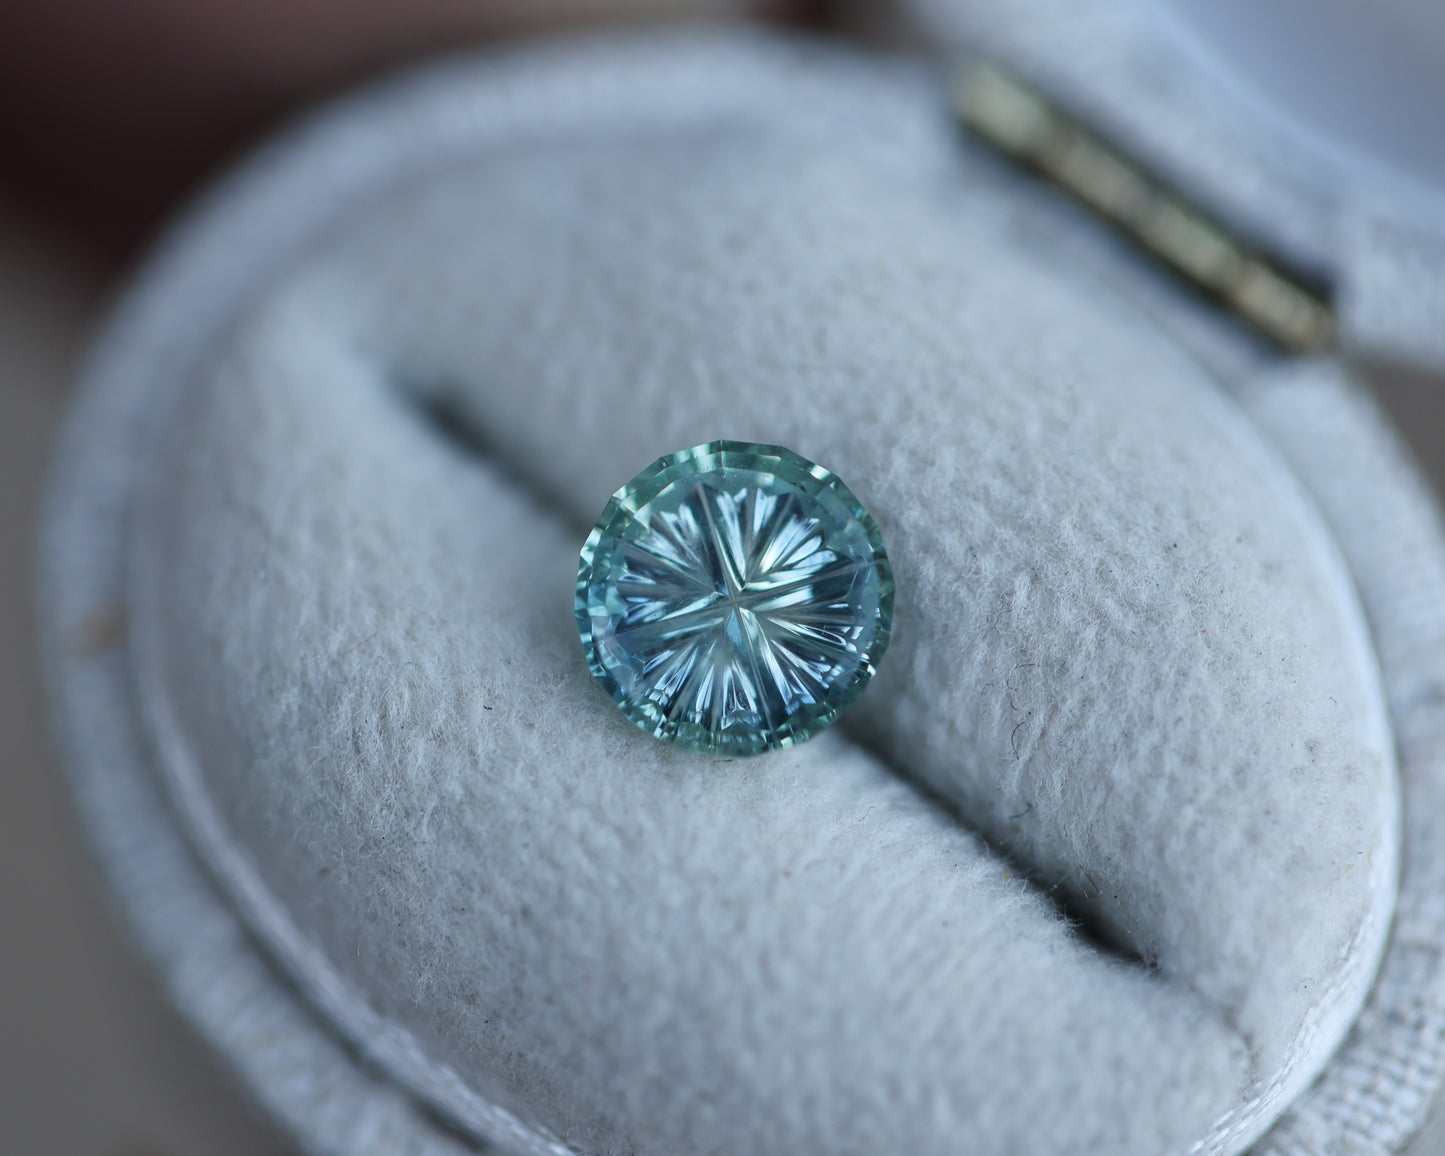 1.05ct round blue teal sapphire - Starbrite cut by John Dyer